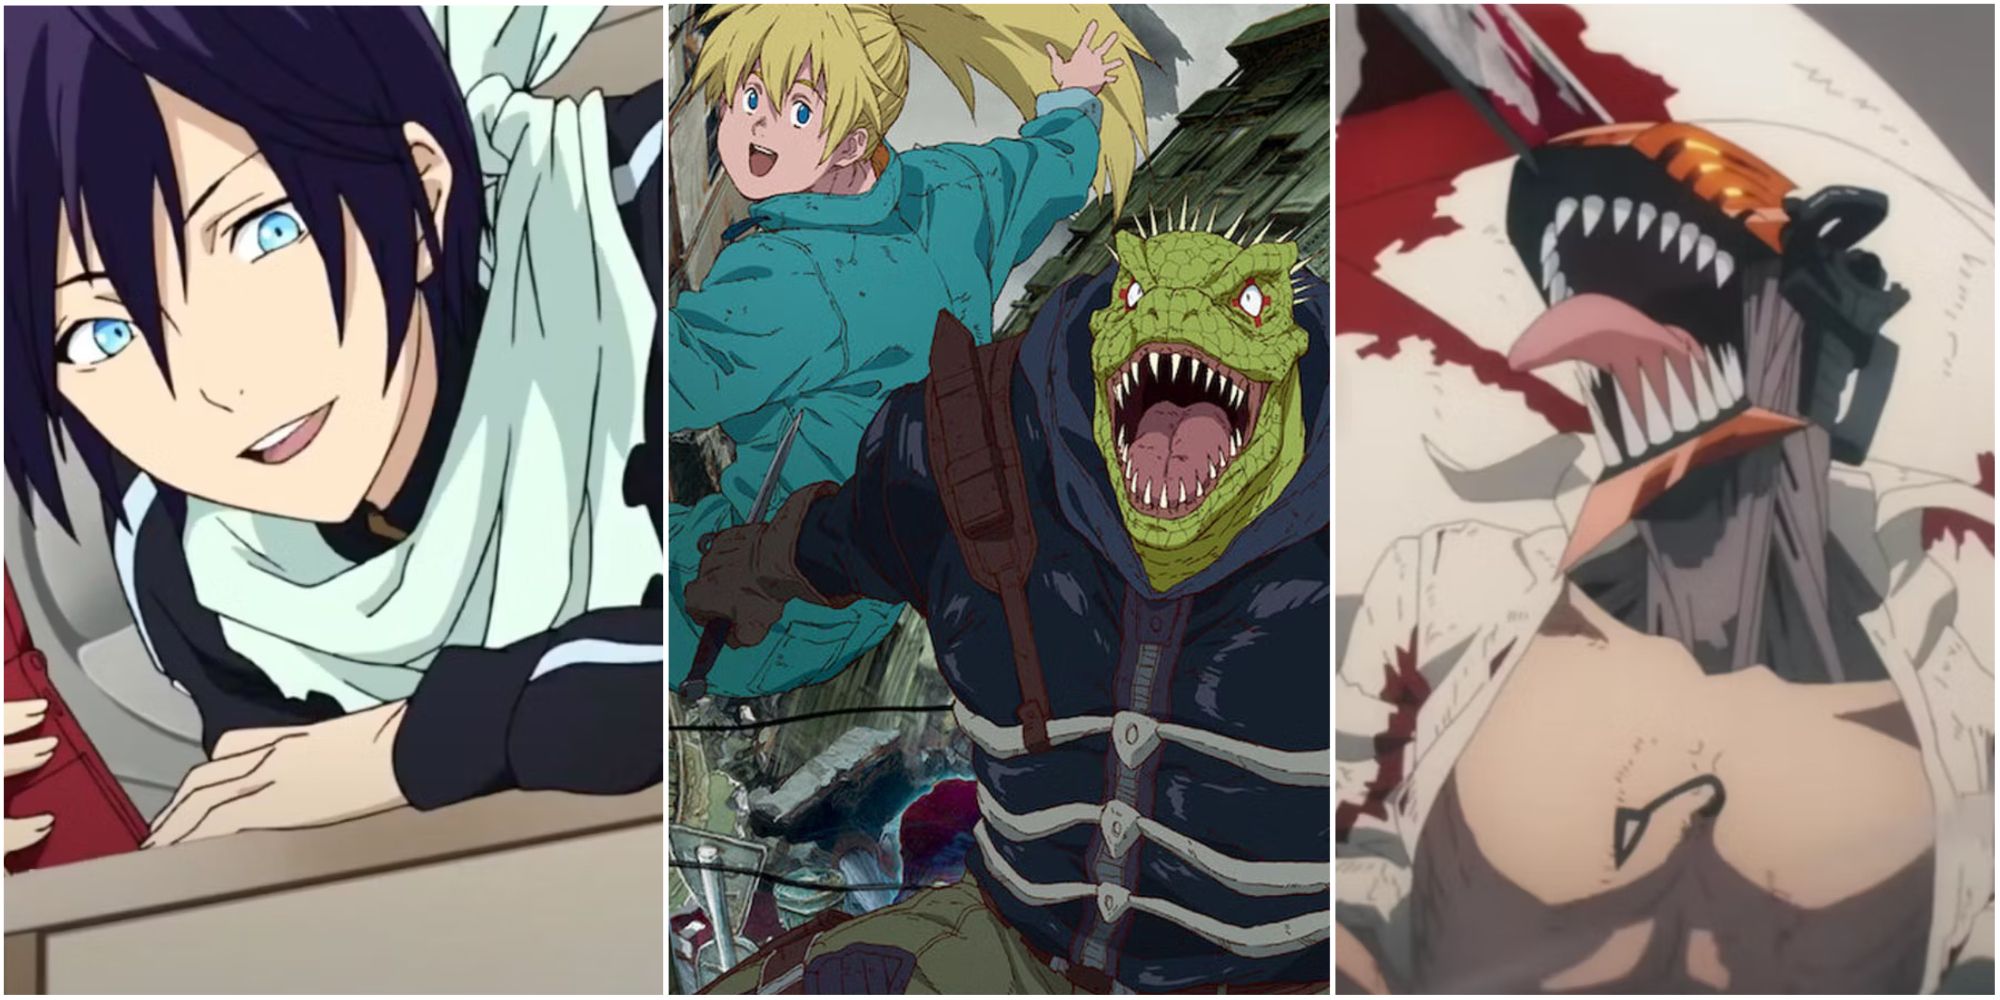 Three-way split grid featuring screenshots from Noragami, Dorohedoro, and Chainsaw Man